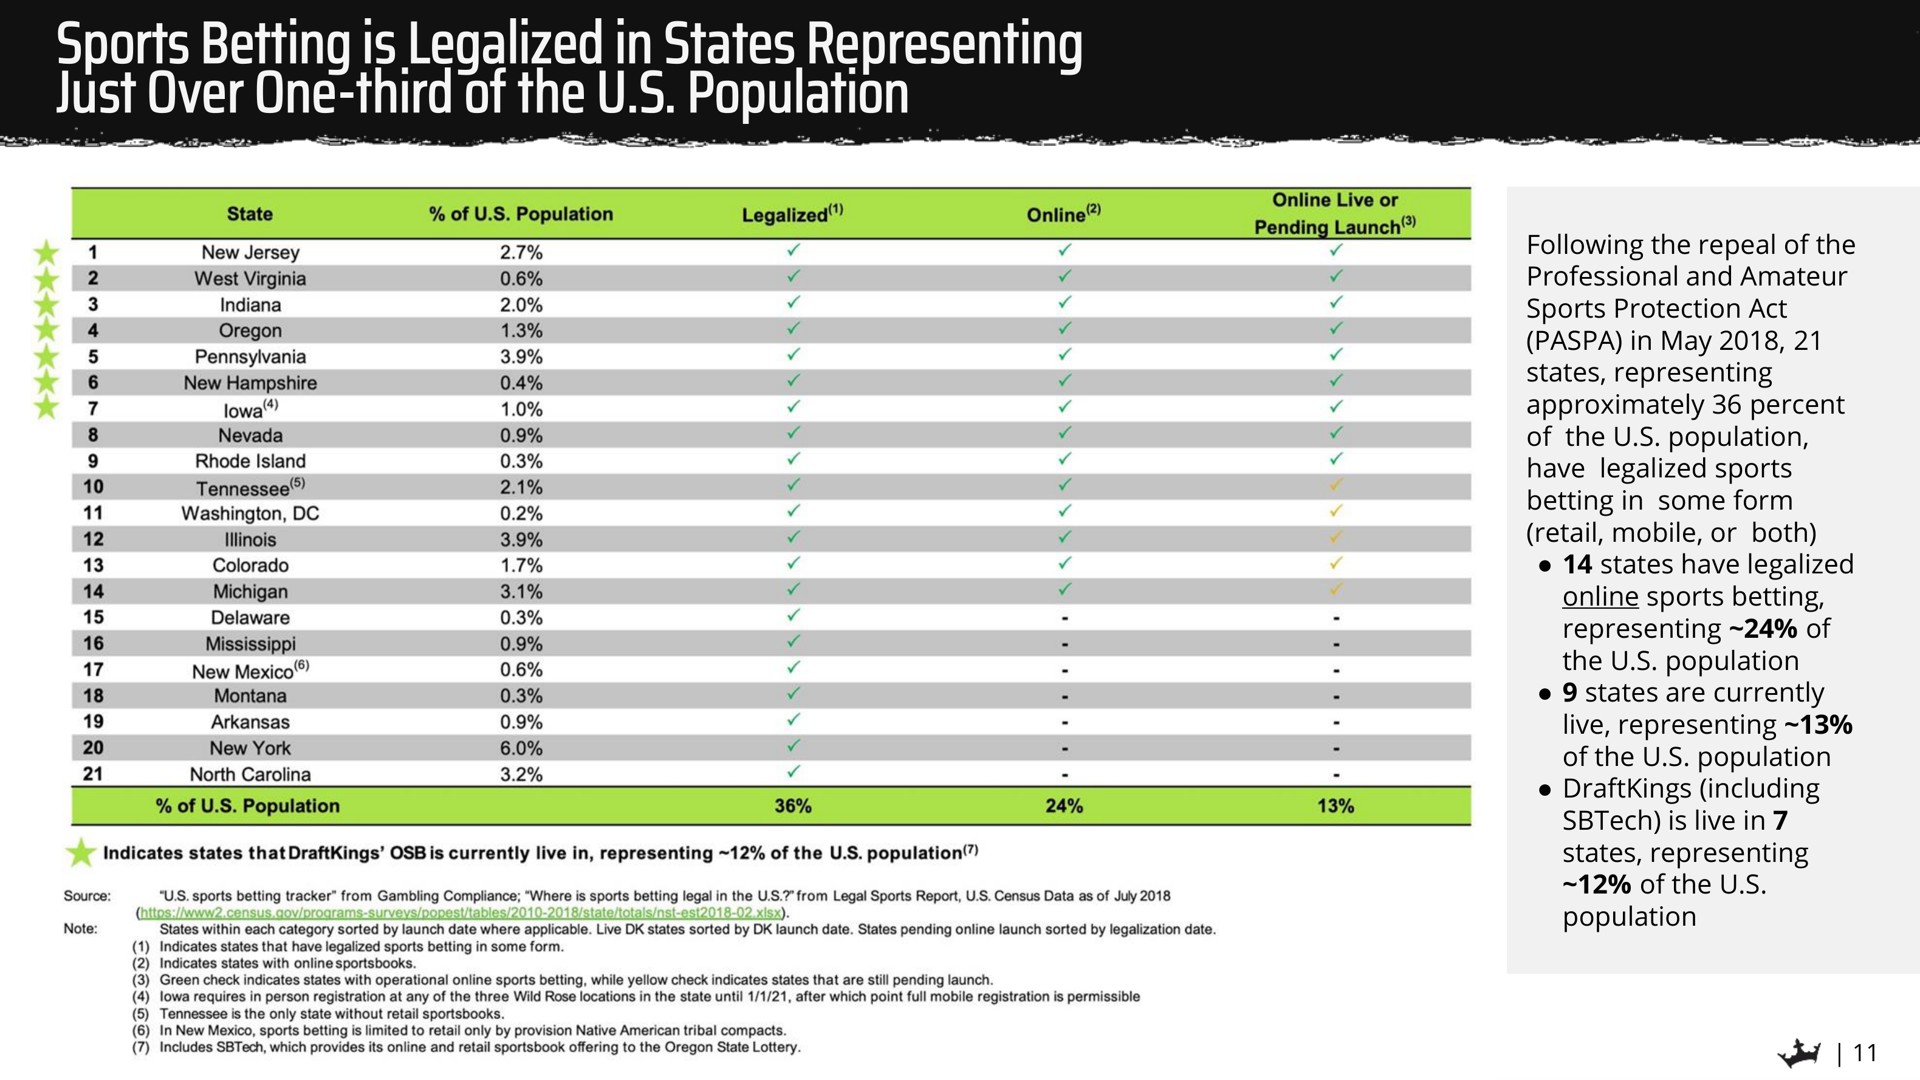 sports betting is legalized in states representing just over one third of the population ear | DraftKings